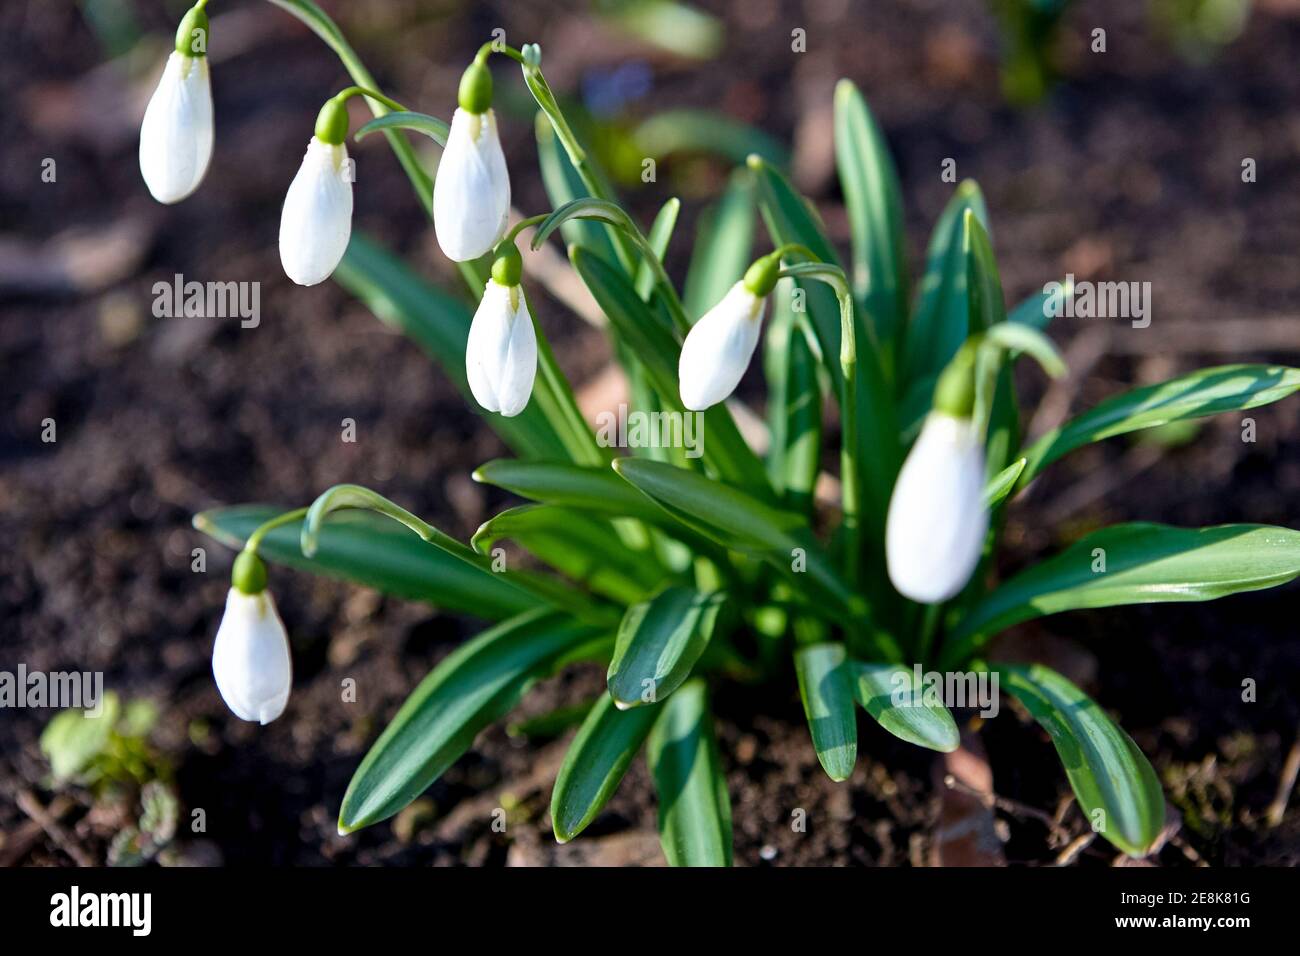 snowdrop flowers at garden. white flowers blossom Stock Photo